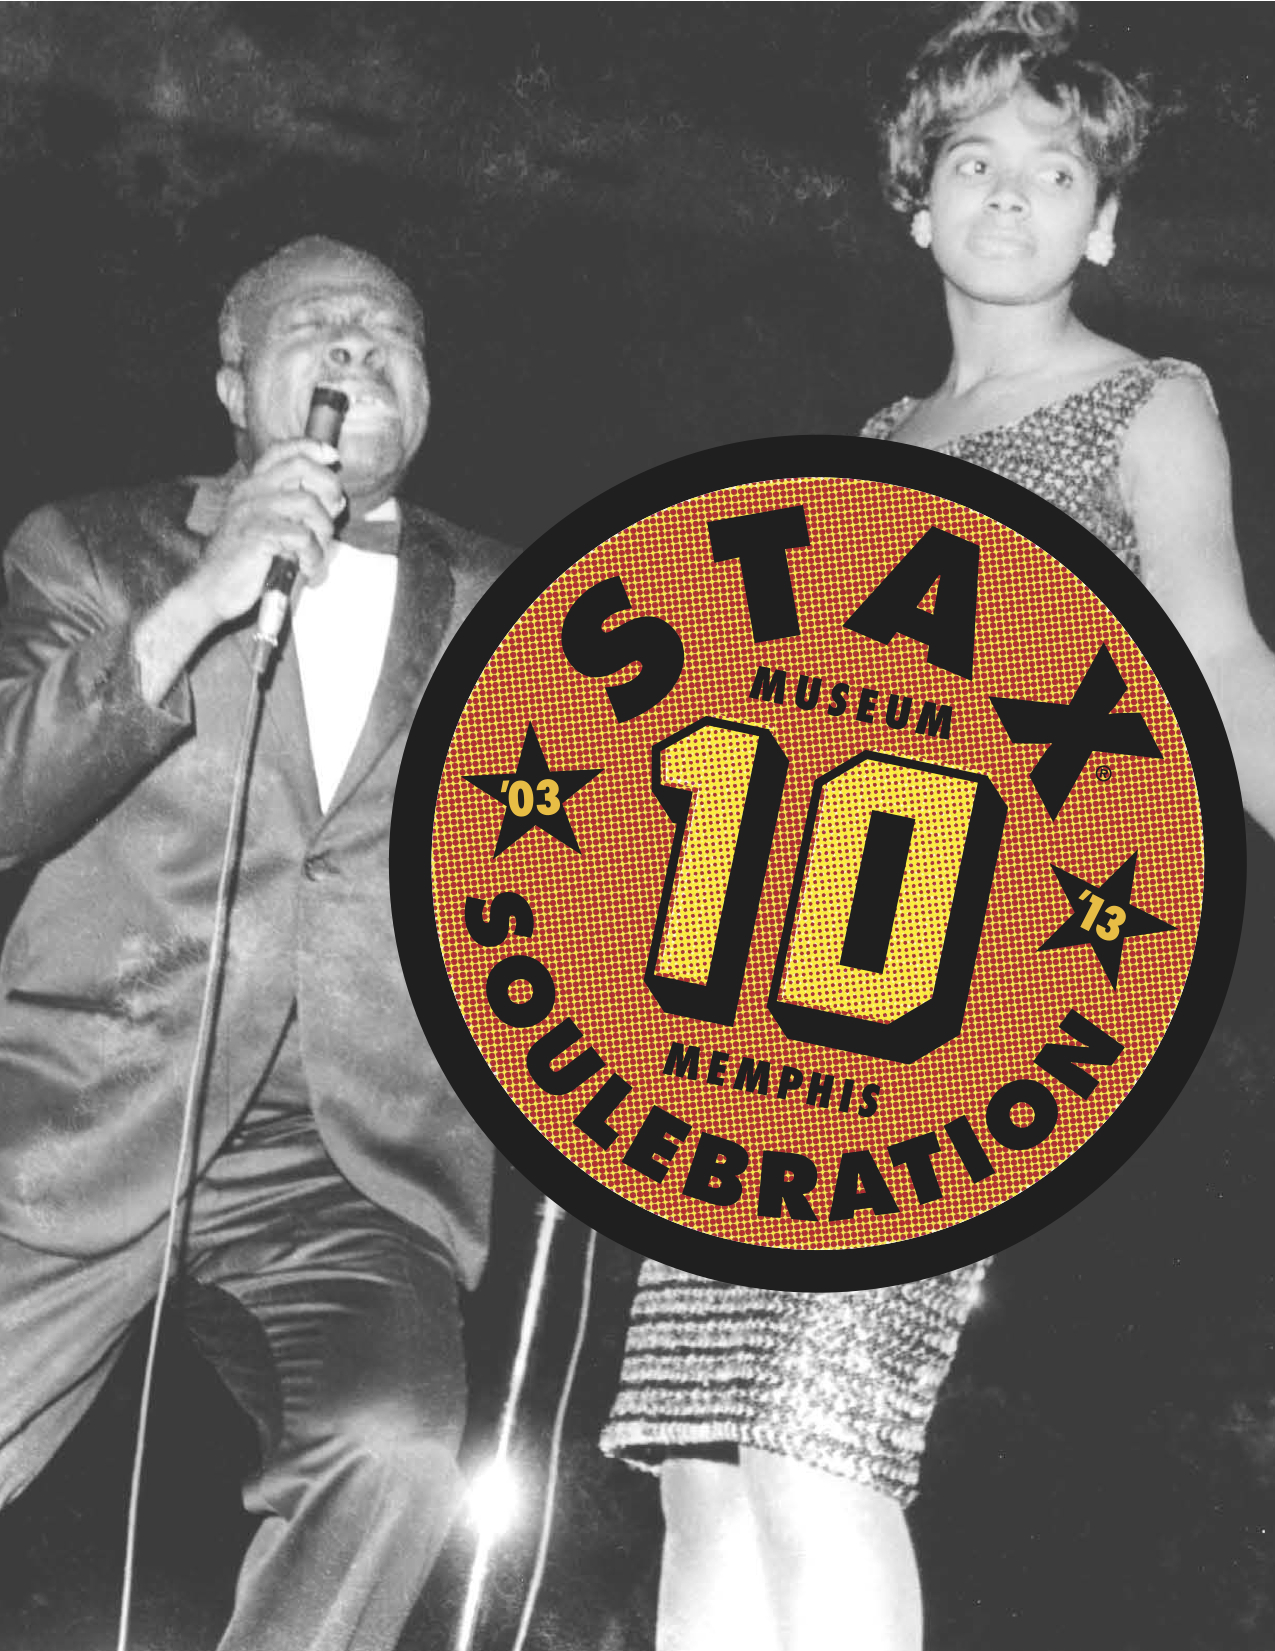  STAX 10 Soulebration event branding  Creative, design and event naming by Chuck Mitchell  Rufus &amp; Carla Thomas  Photo copyright of the Withers Family Trust 